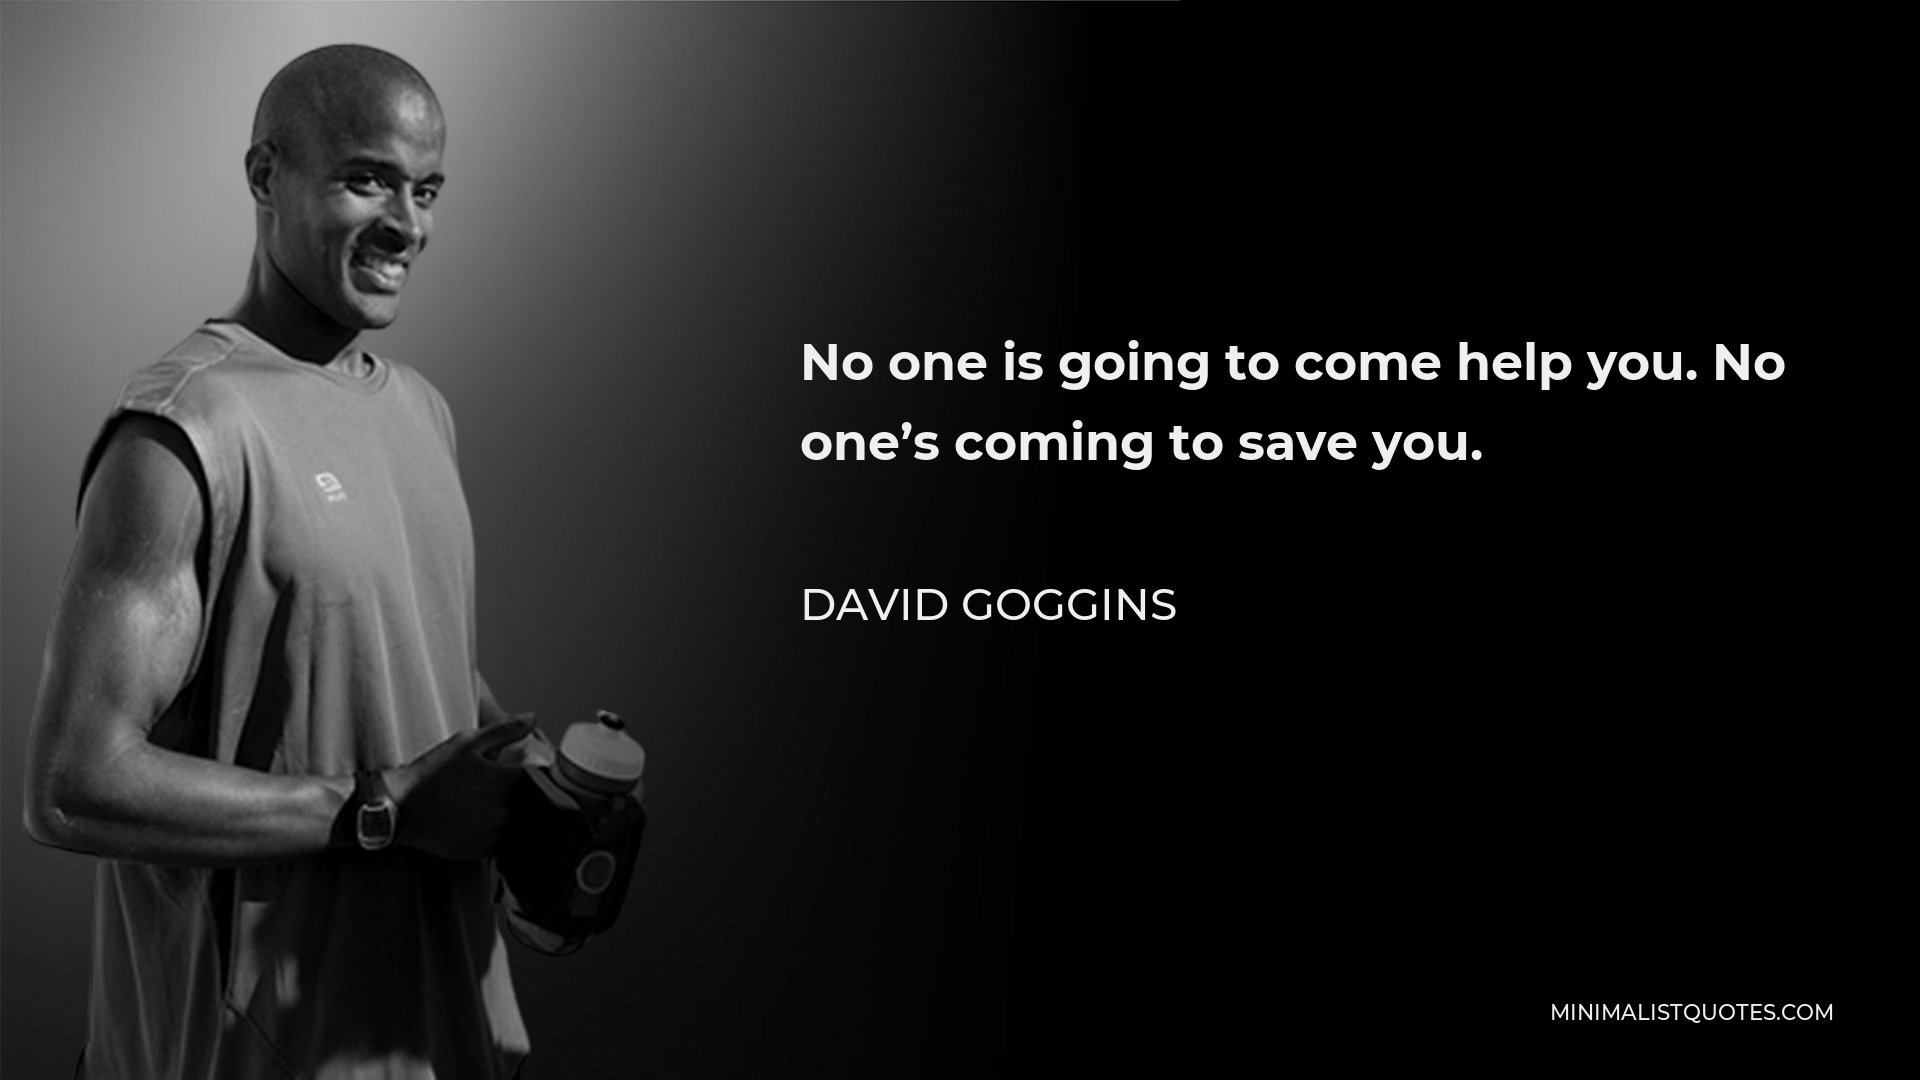 David Goggins Quote - No one is going to come help you. No one’s coming to save you.